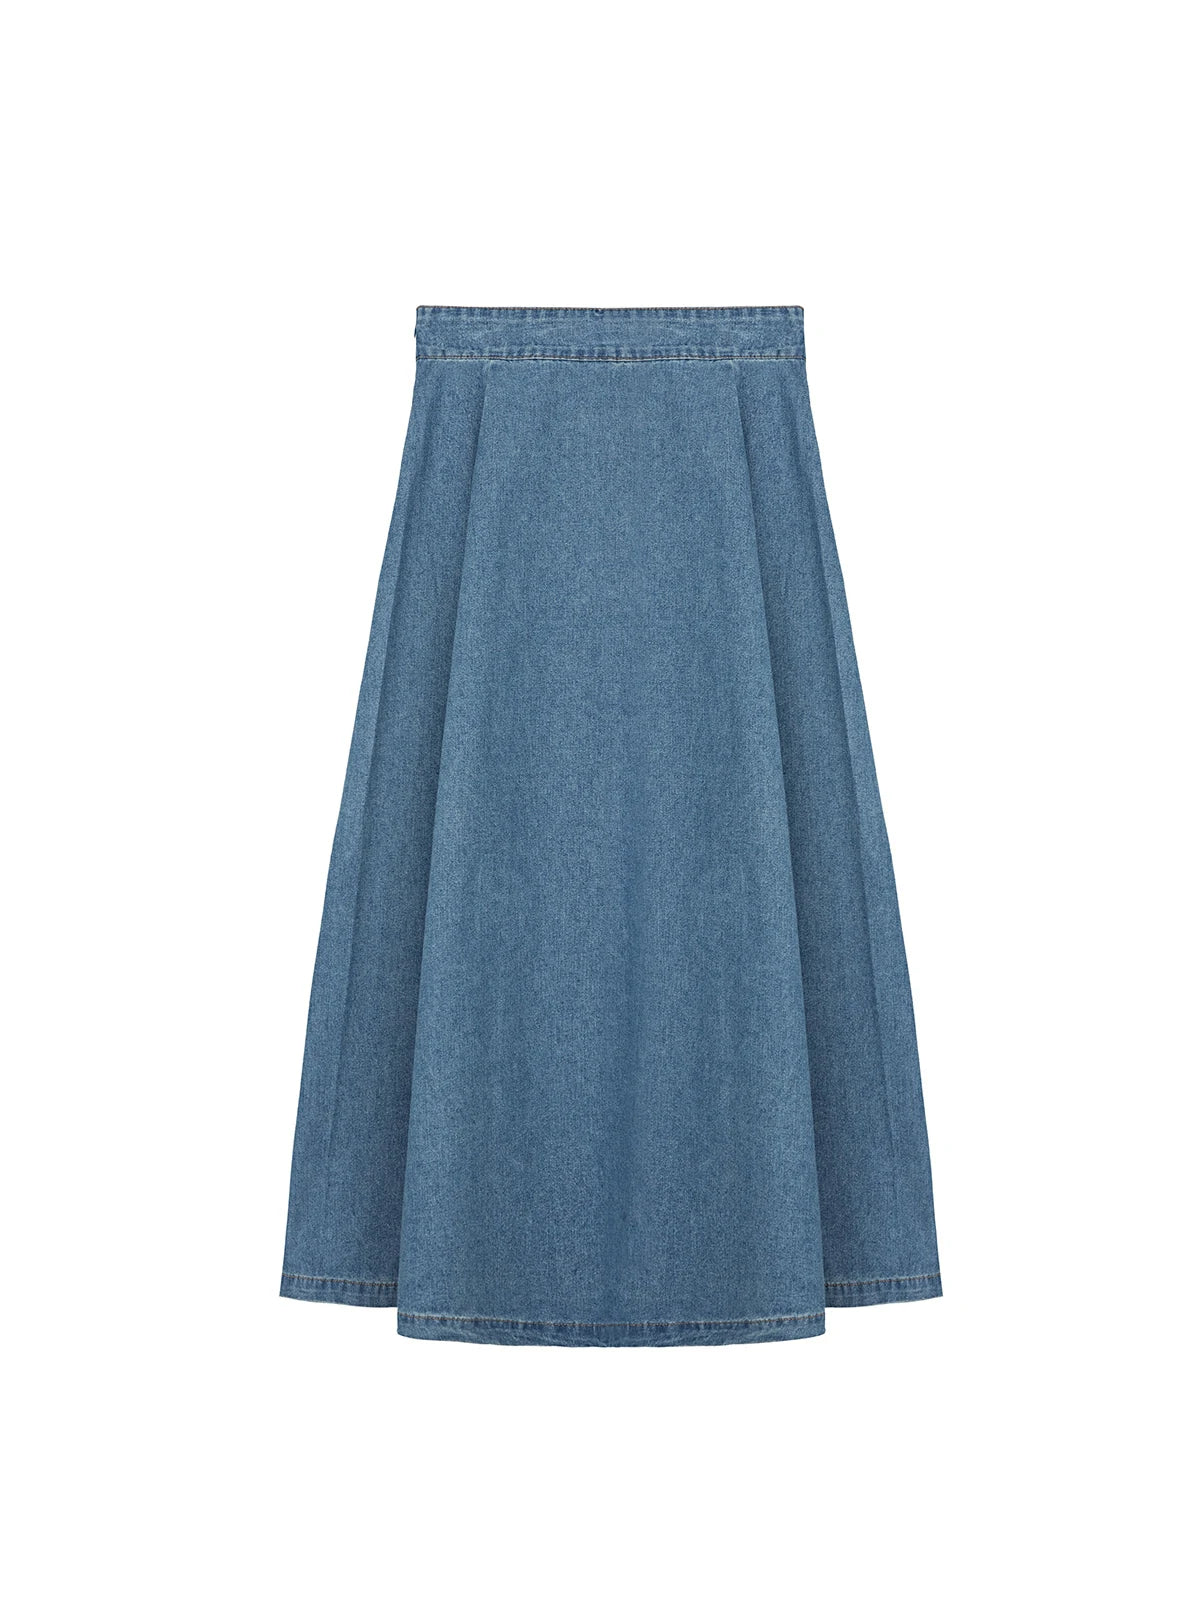 Versatile and comfortable blue denim A-line skirt with a high waist, and classic design, making it a stylish and practical choice for everyday wear.